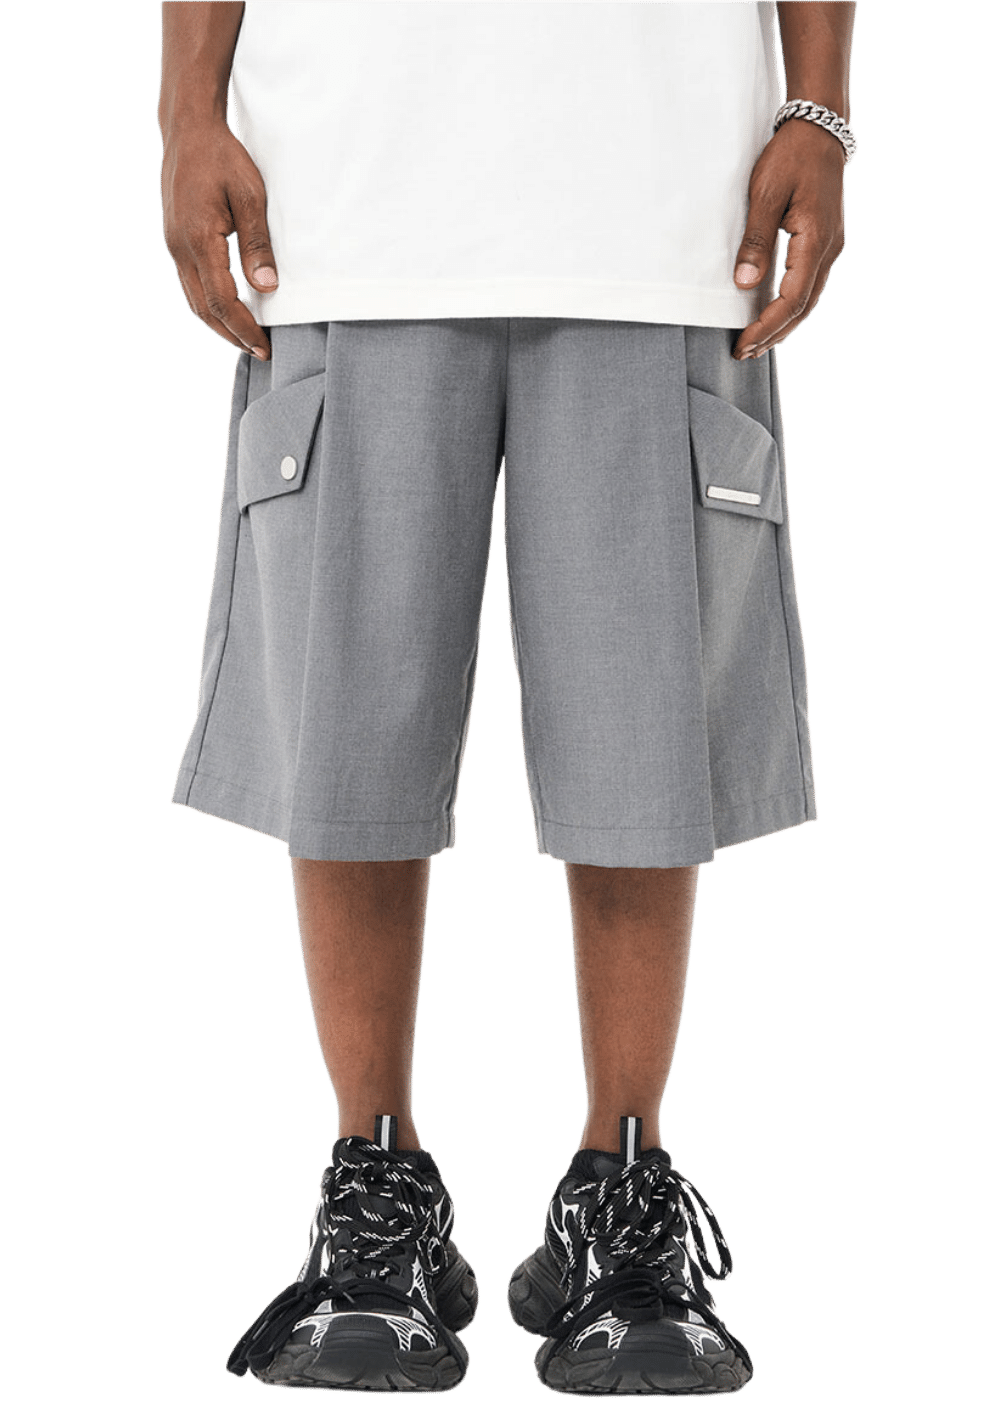 Irregular Pleated Buttons Suit Shorts - PSYLOS 1, Irregular Pleated Buttons Suit Shorts, Shorts, HARSH AND CRUEL, PSYLOS 1